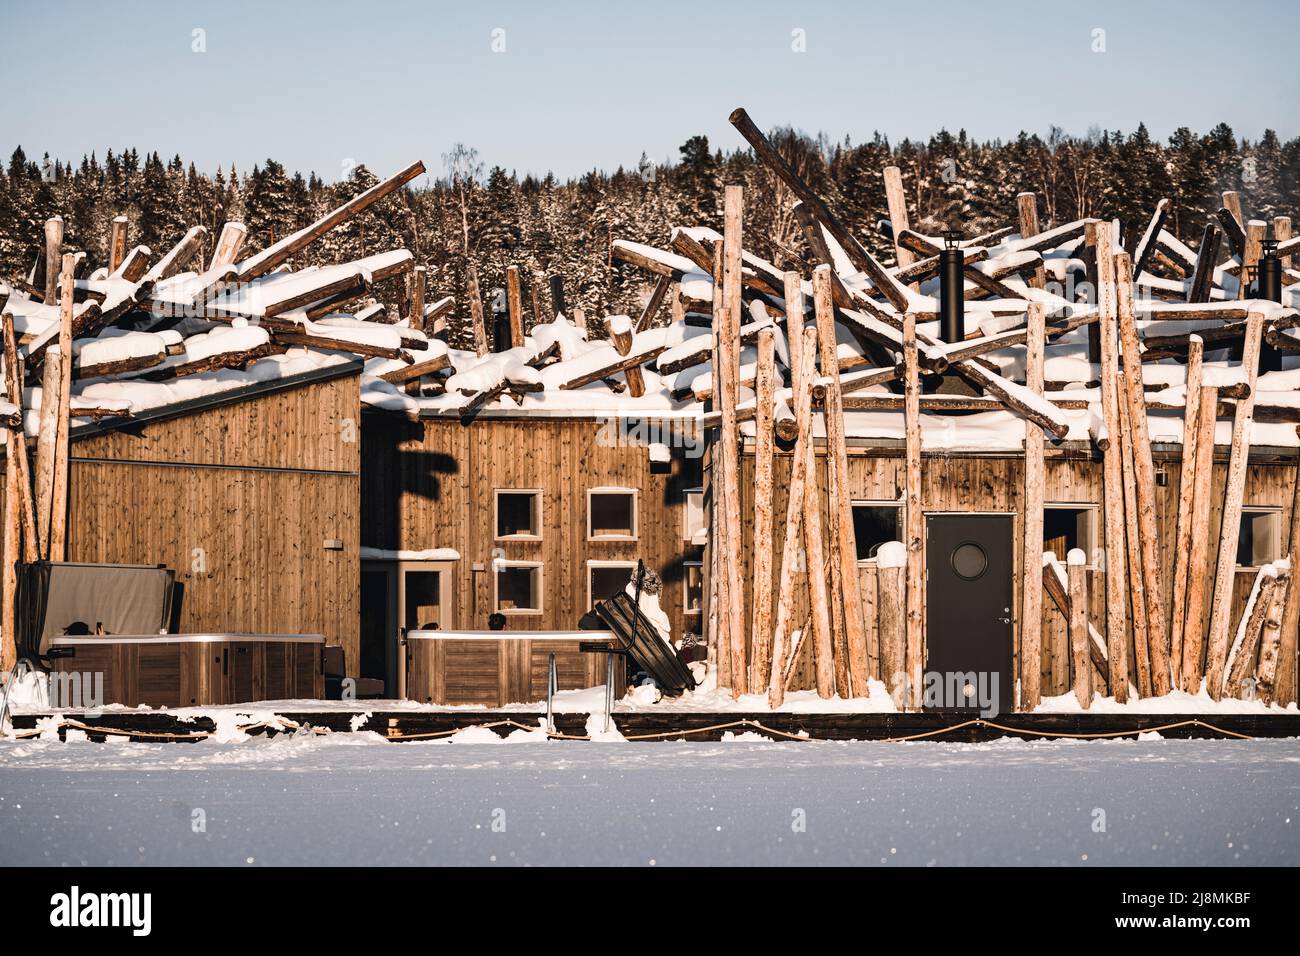 Scandinavian design complex of the eco friendly Arctic Bath Spa hotel built with local timber, Harads, Lapland, Sweden Stock Photo